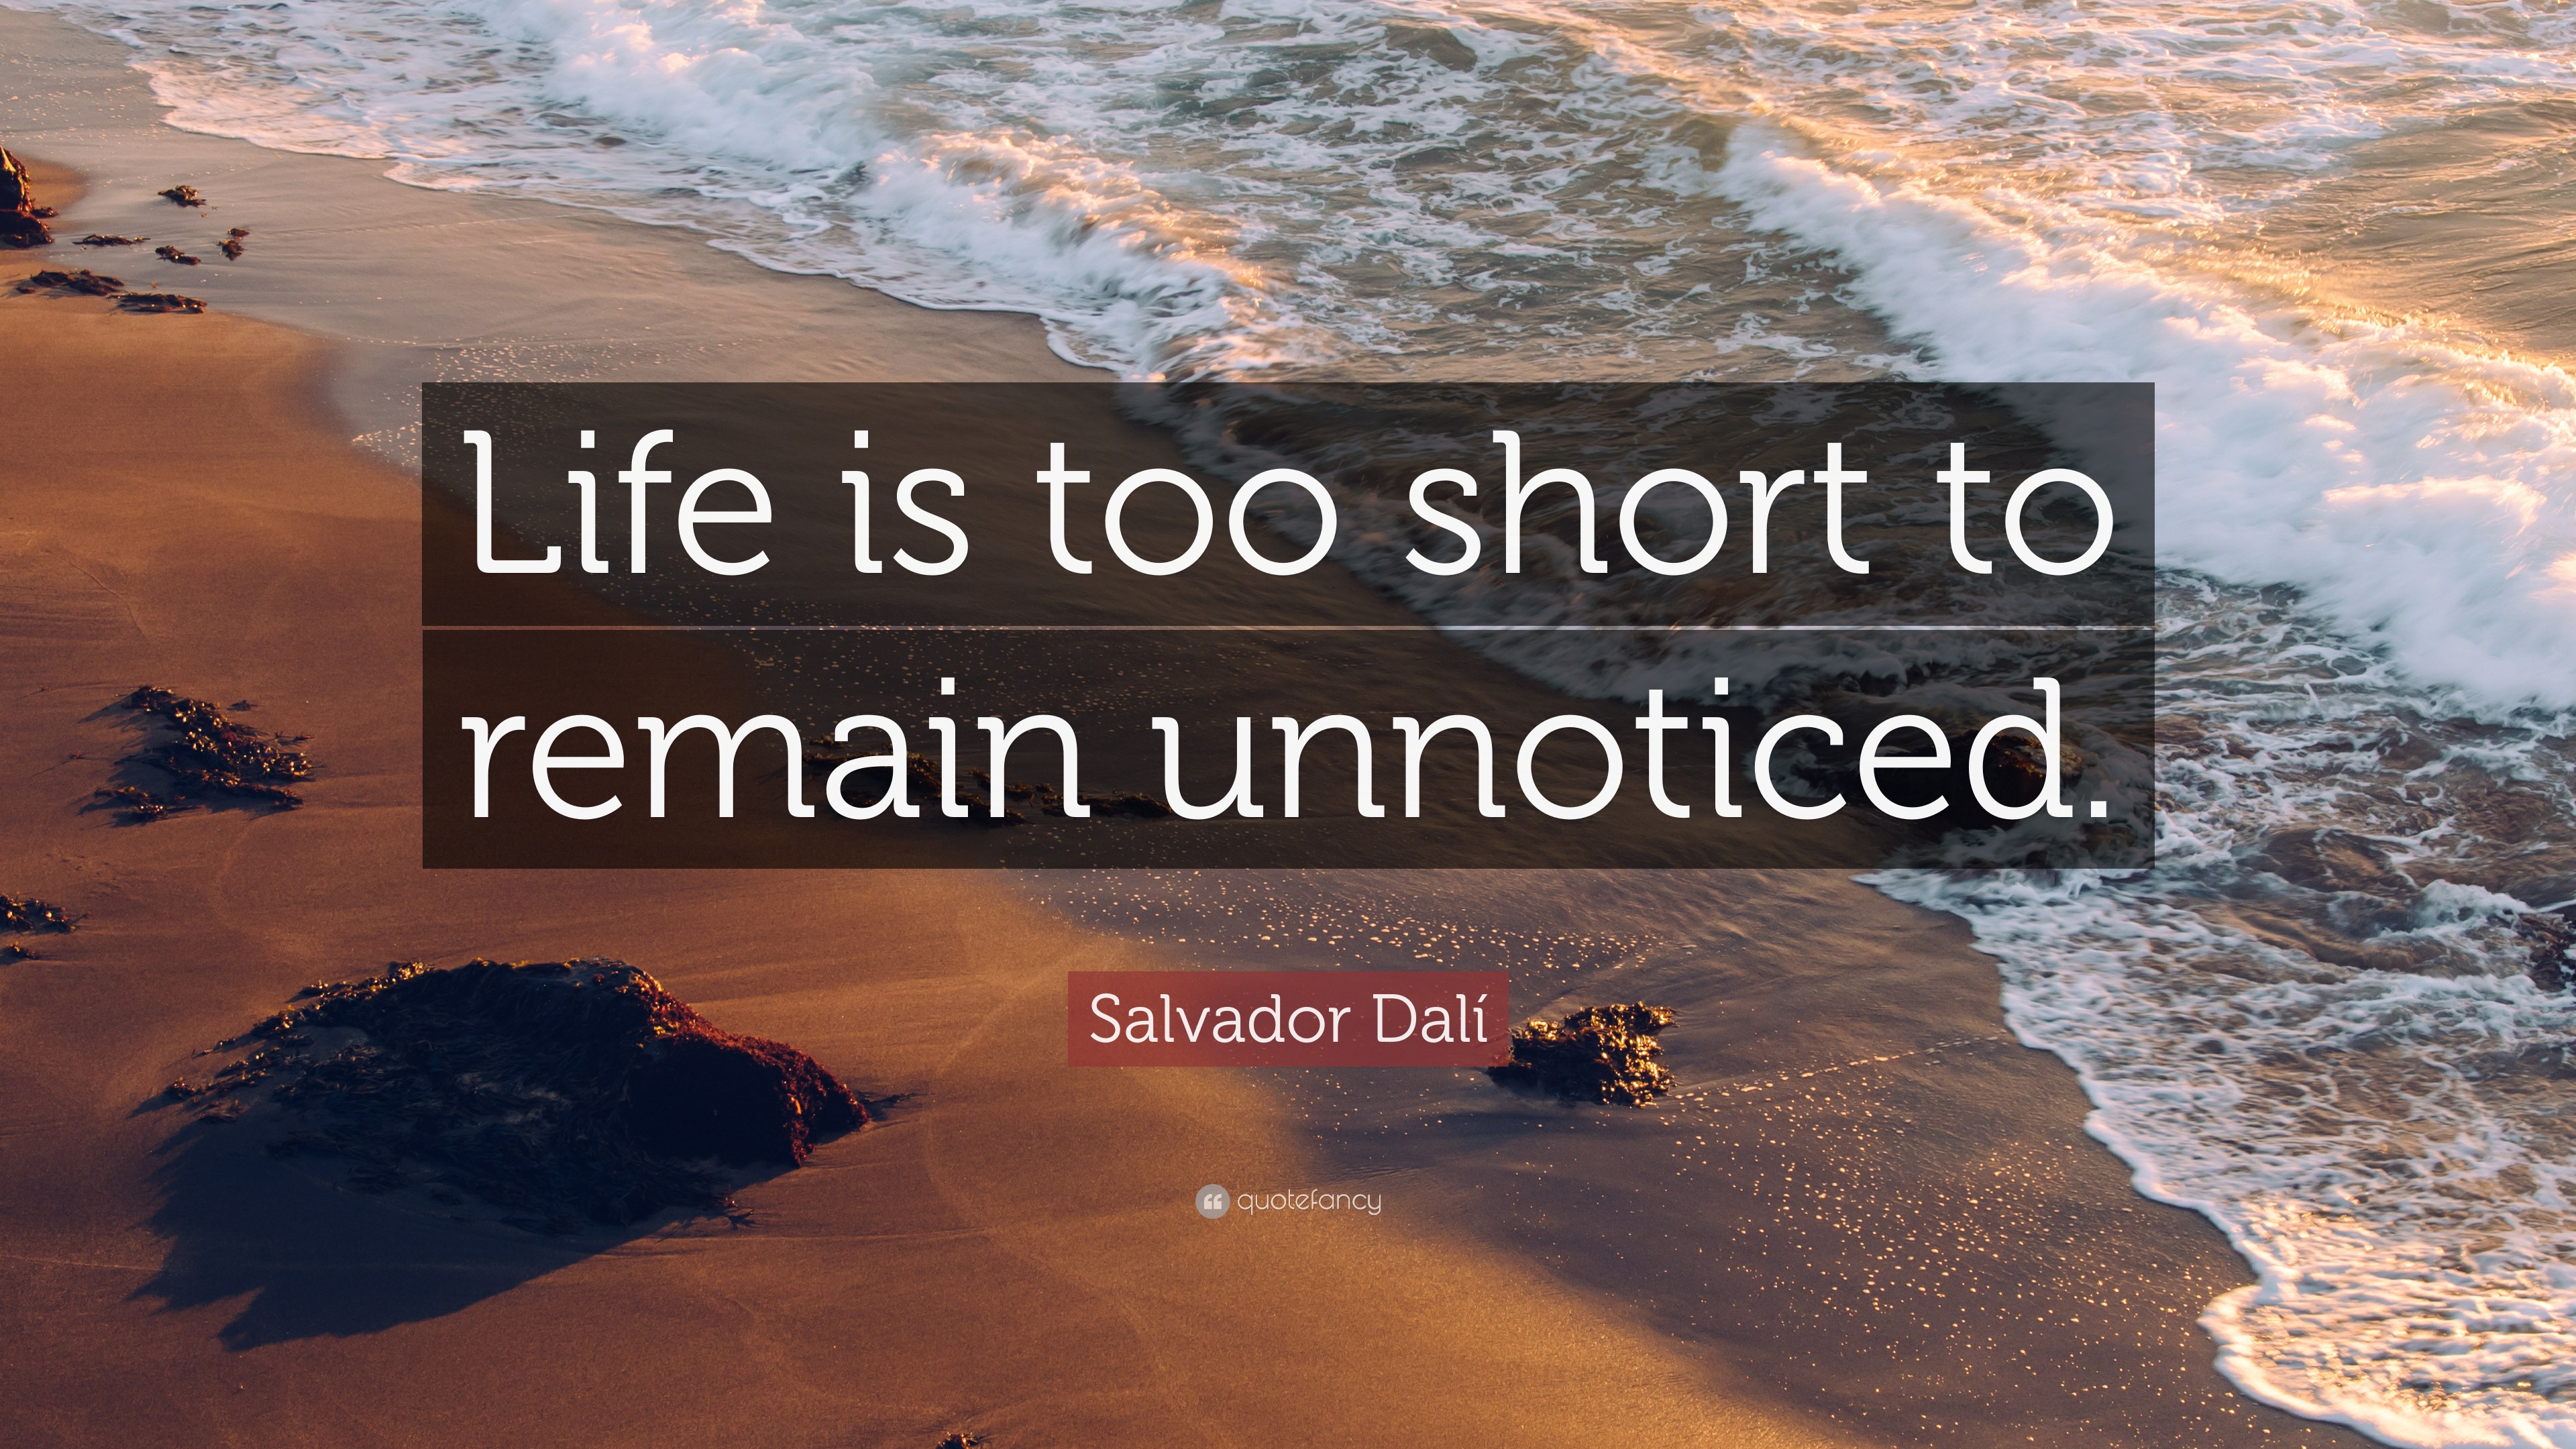 Salvador Dalí Quote: “Life is too short to remain unnoticed.”